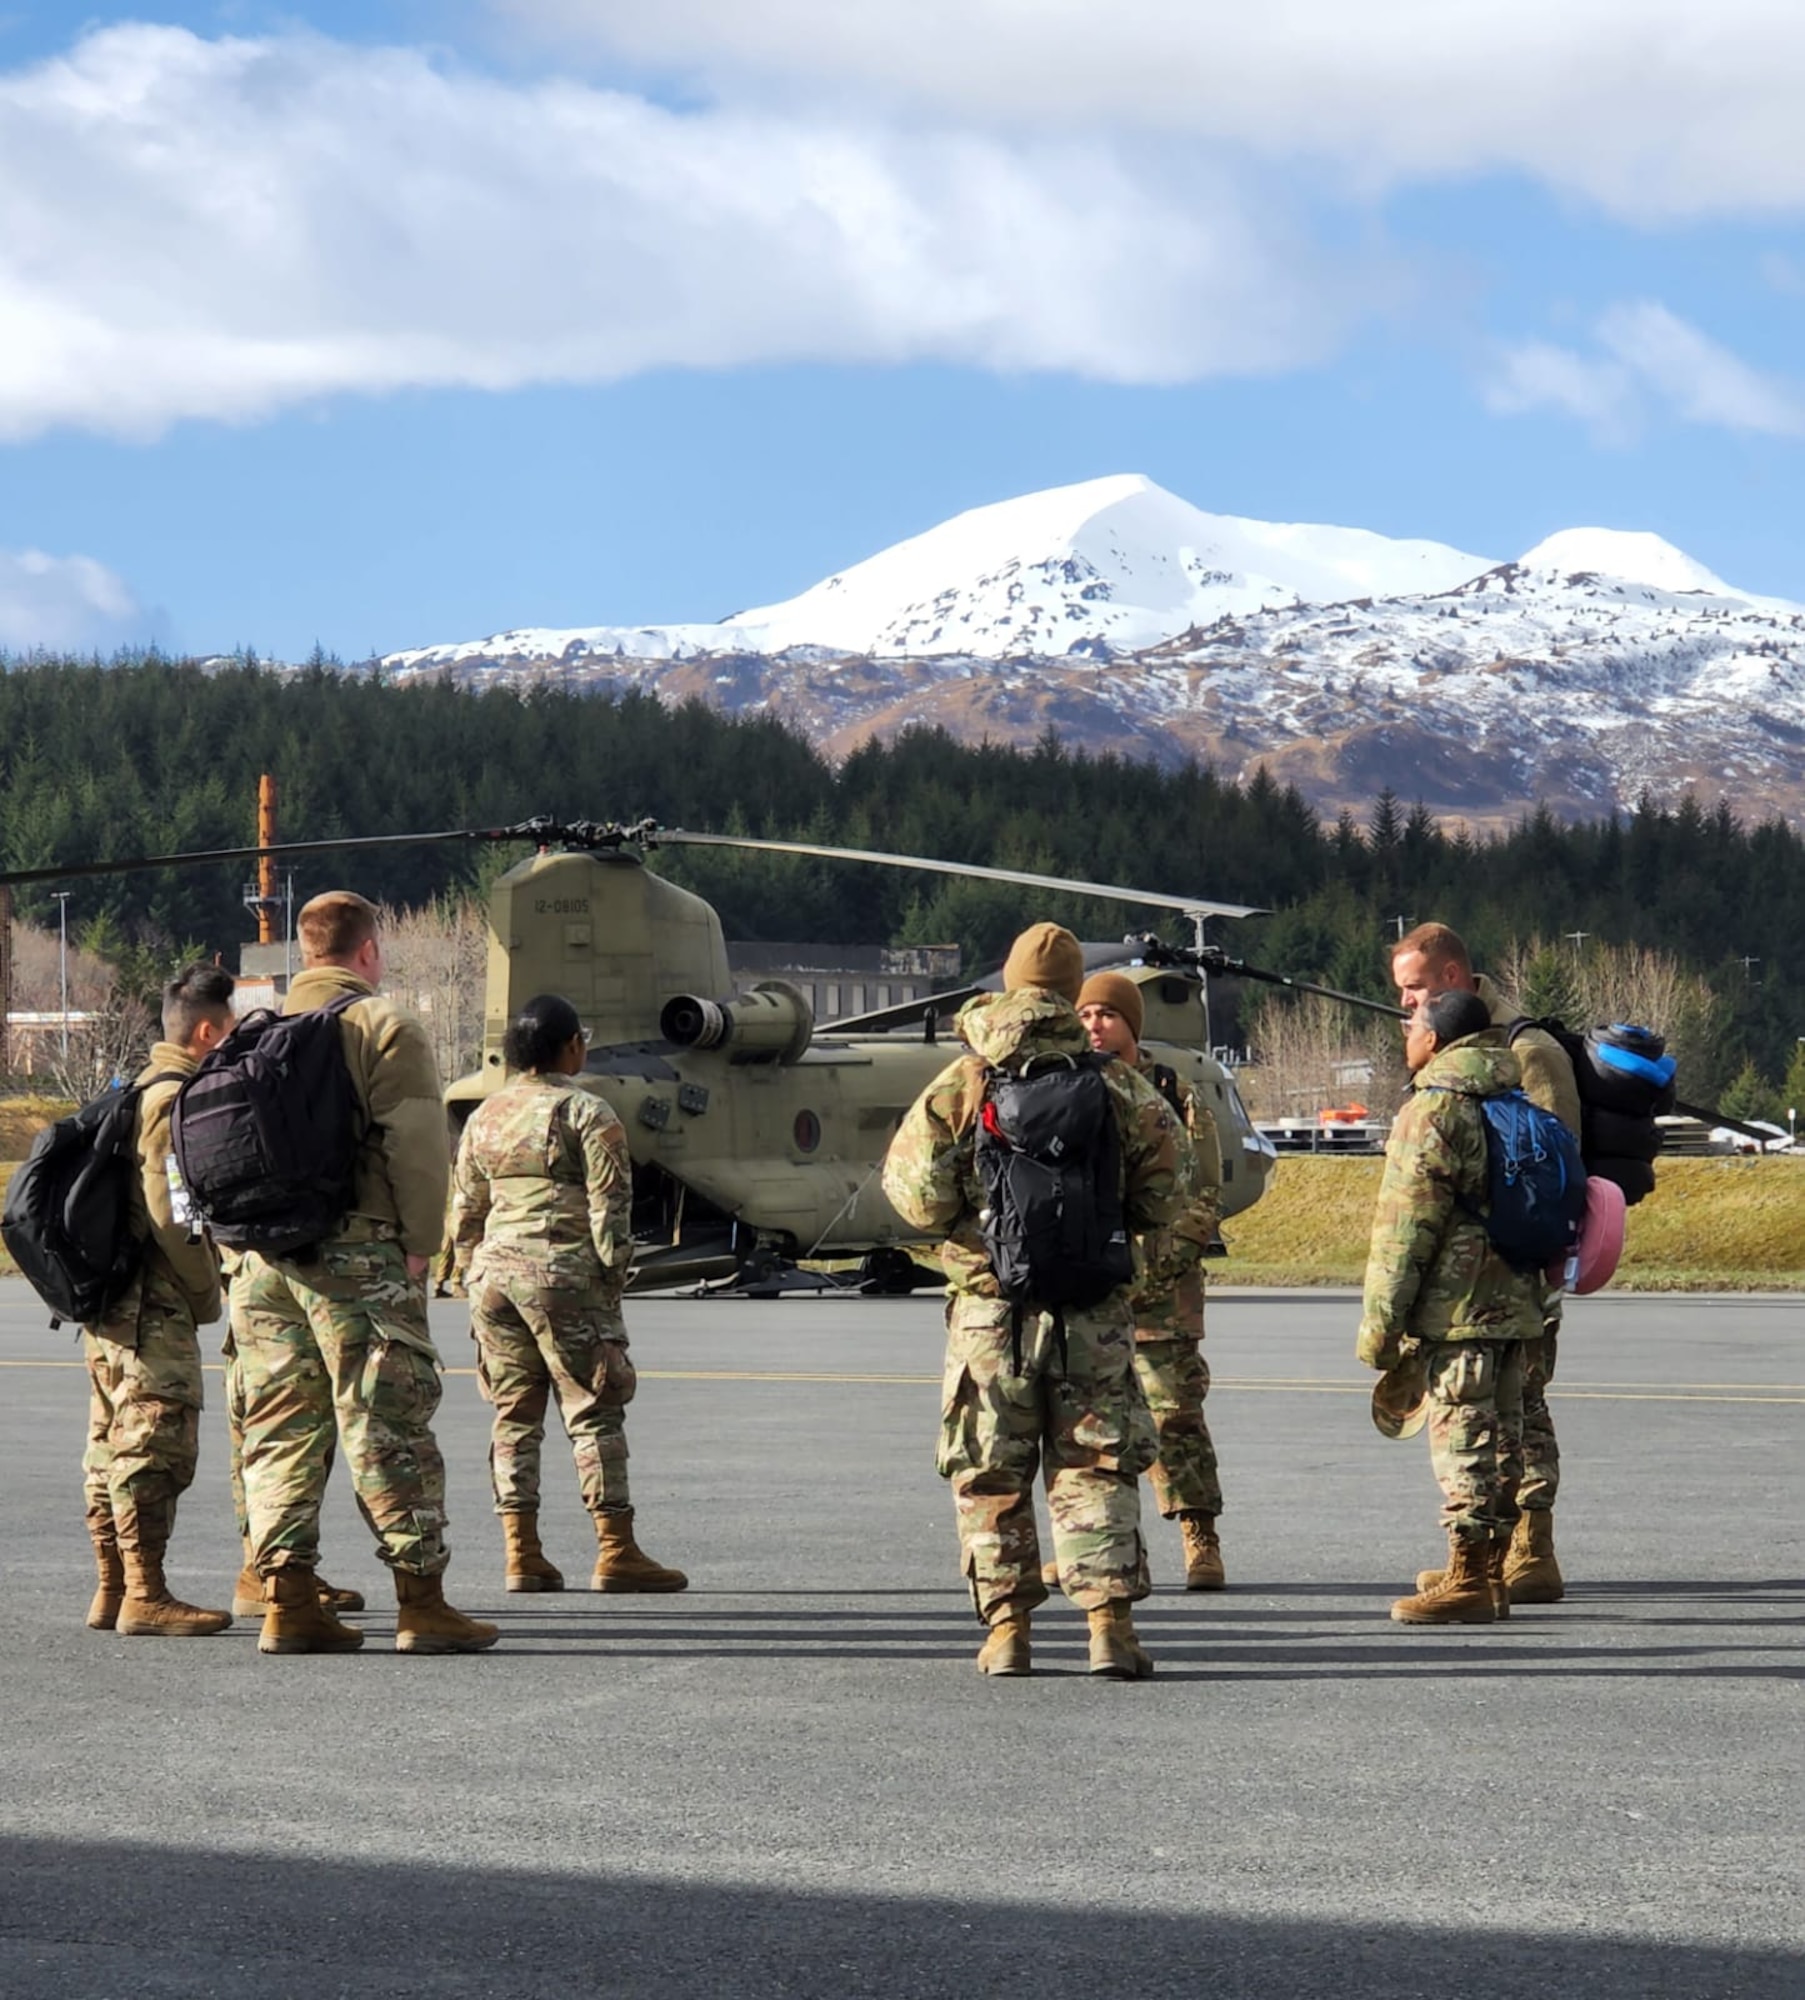 Airmen stand in the foreground, with a Chinook behind them and a snow-capped mountain in the background